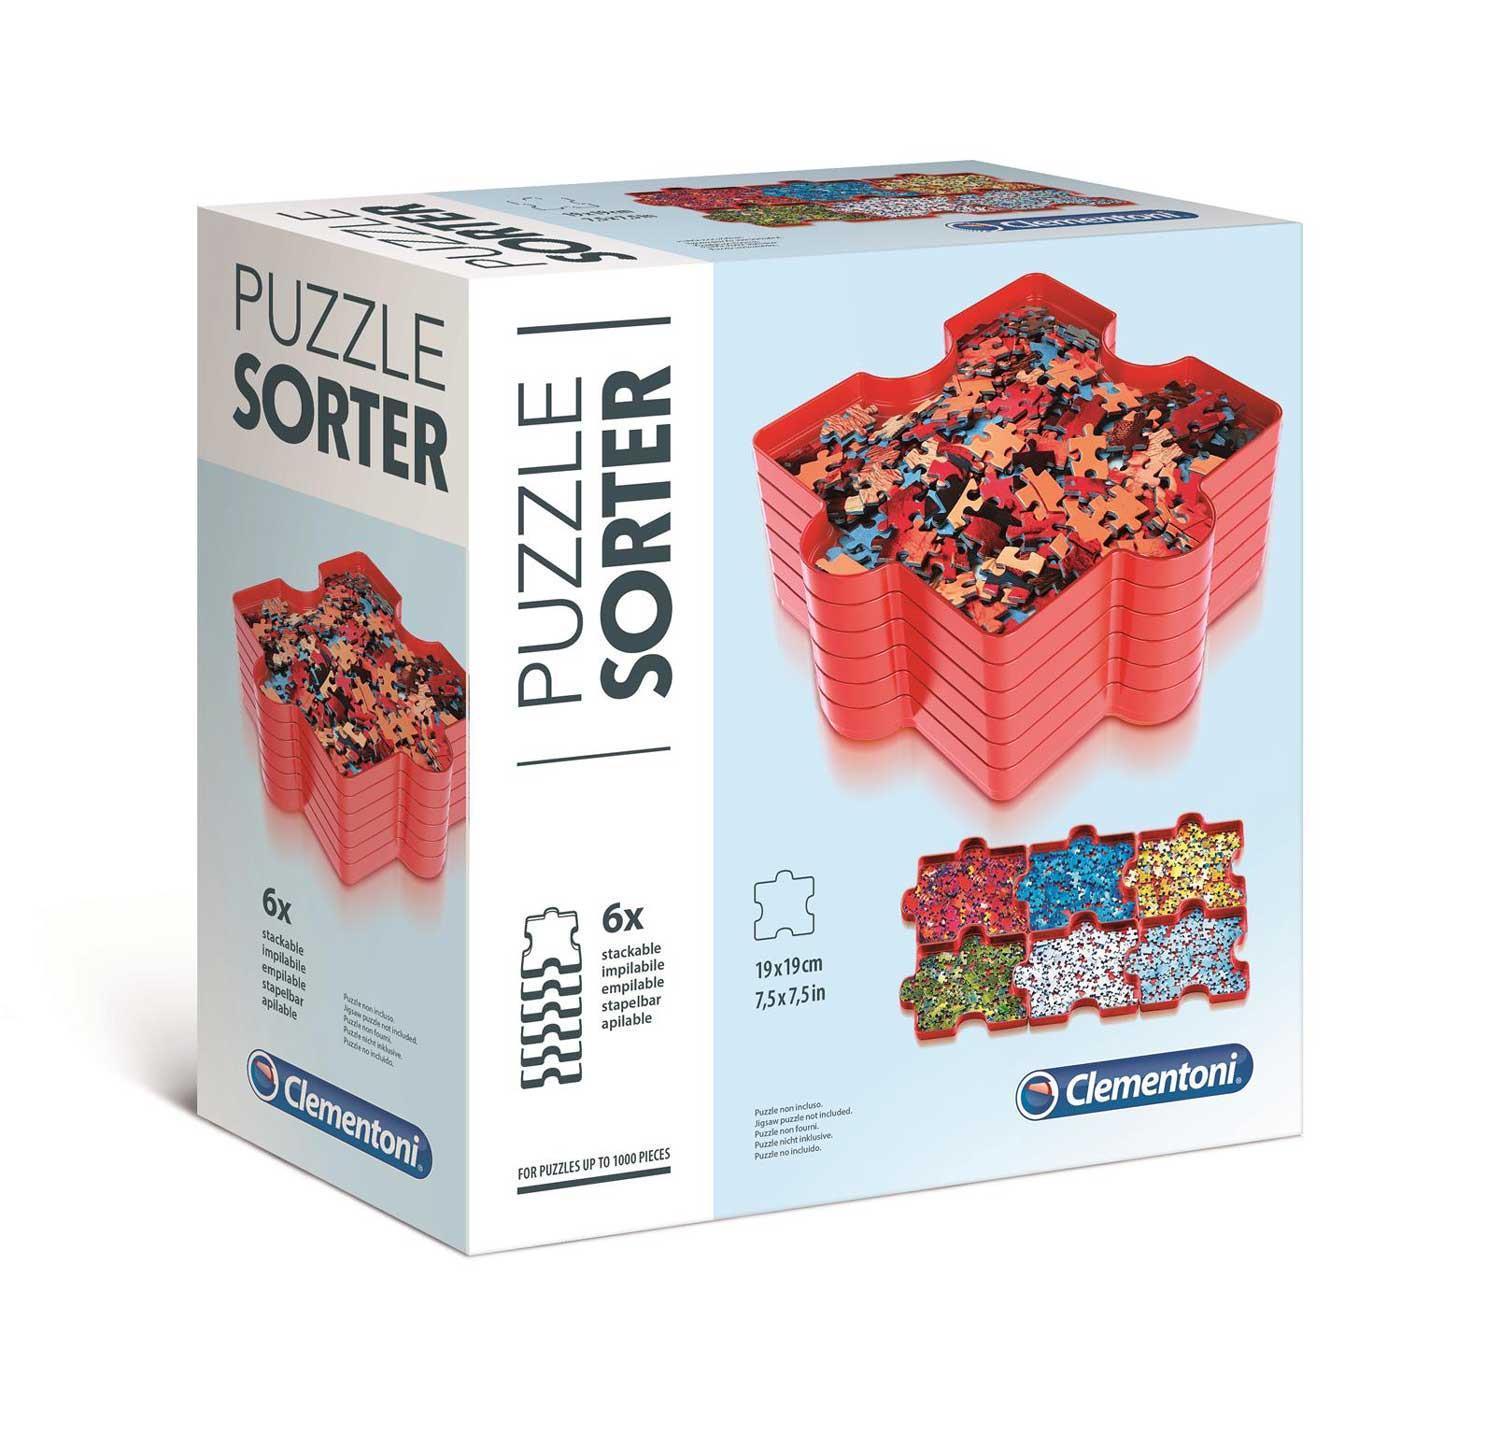 Puzzle Sorter - Never Miss a Piece of Puzzles (6 Pack) - Taylorson